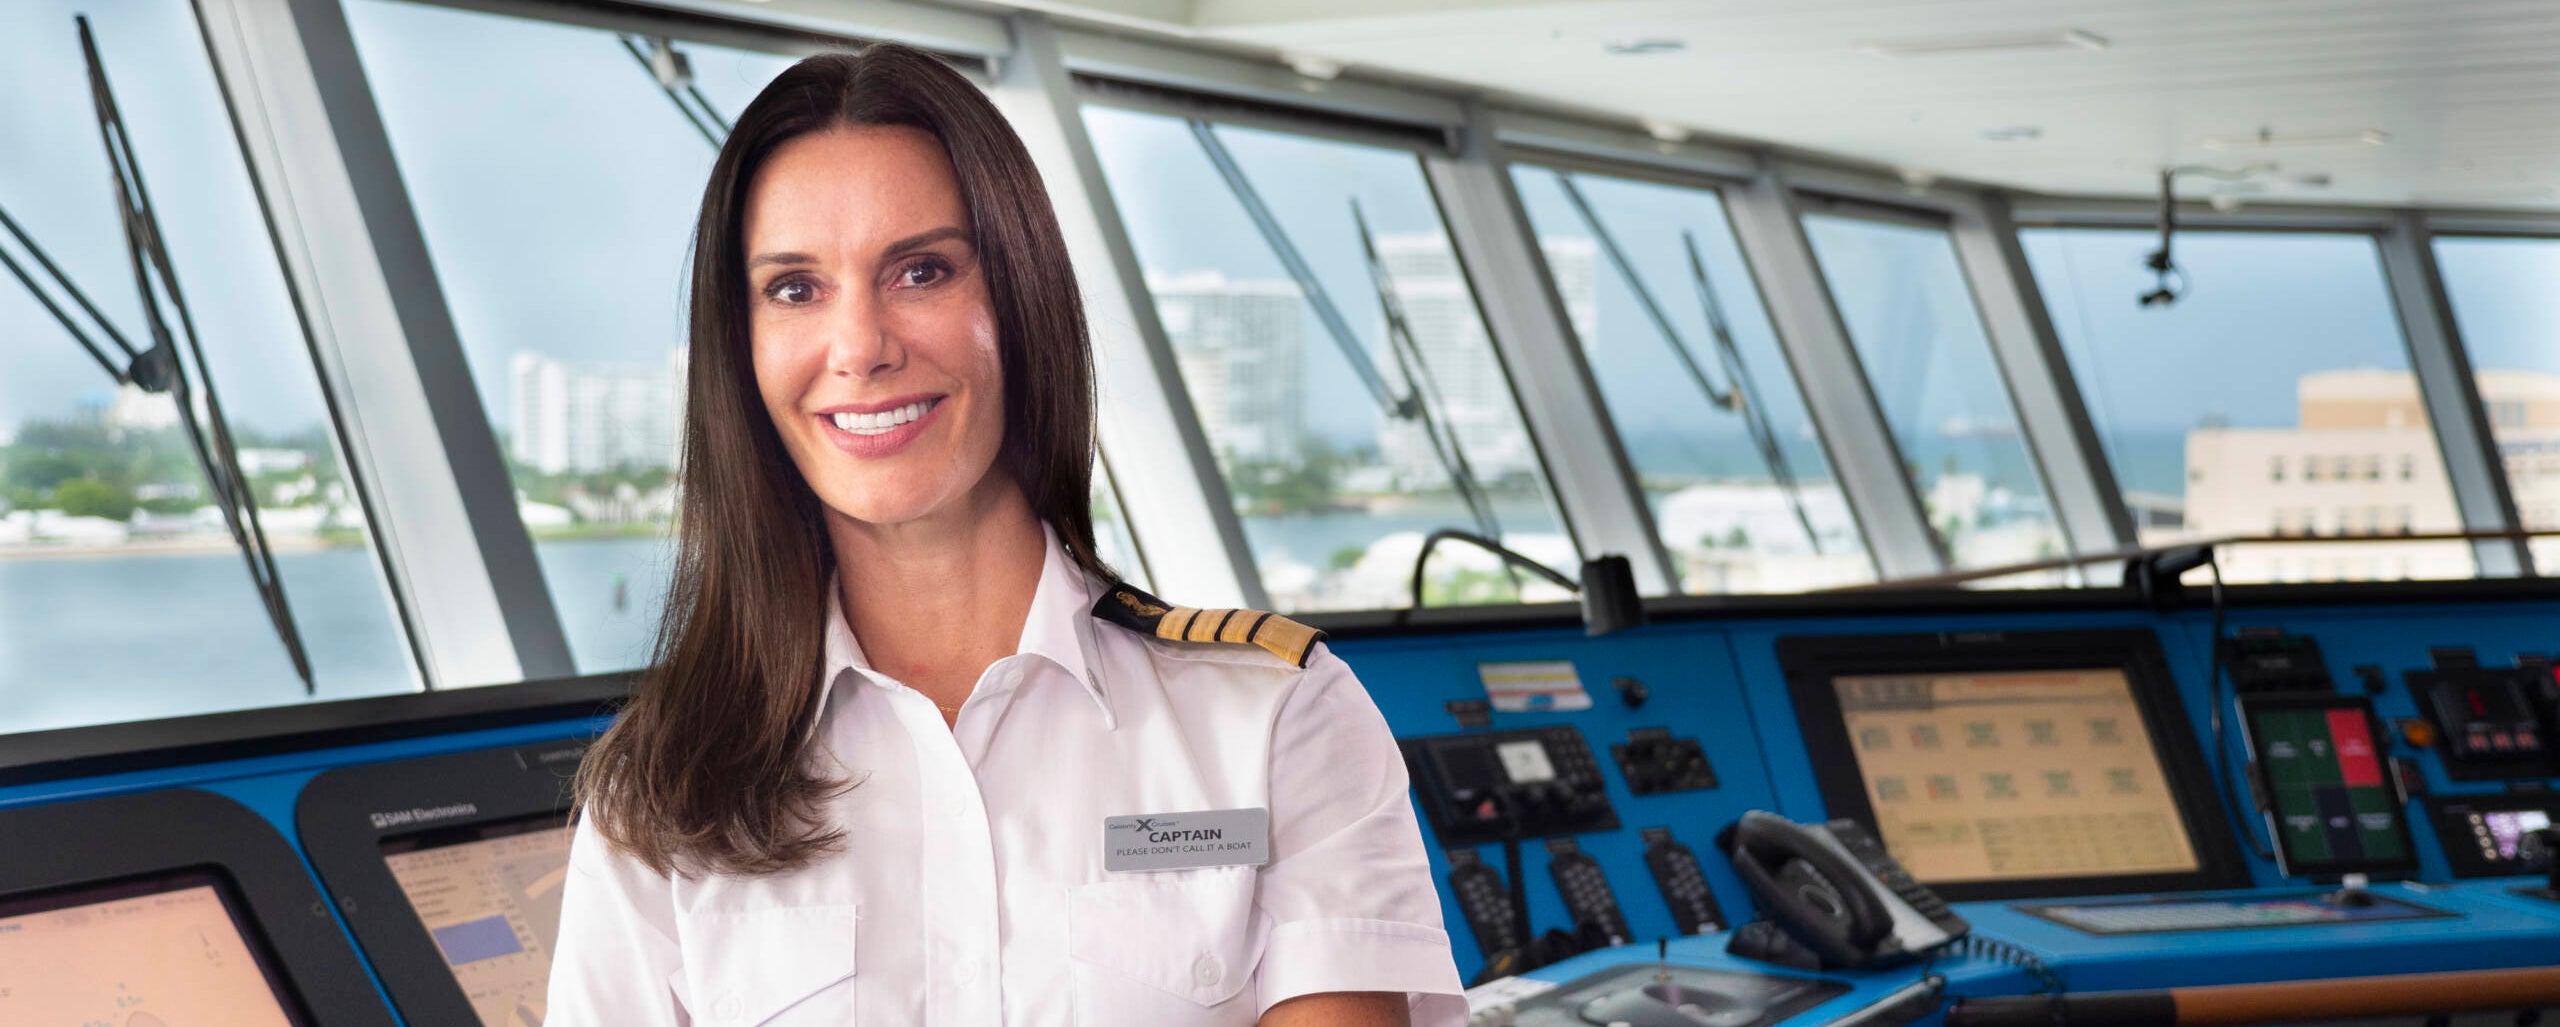 The First American Woman To Captain A Cruise Ship Schools Internet 